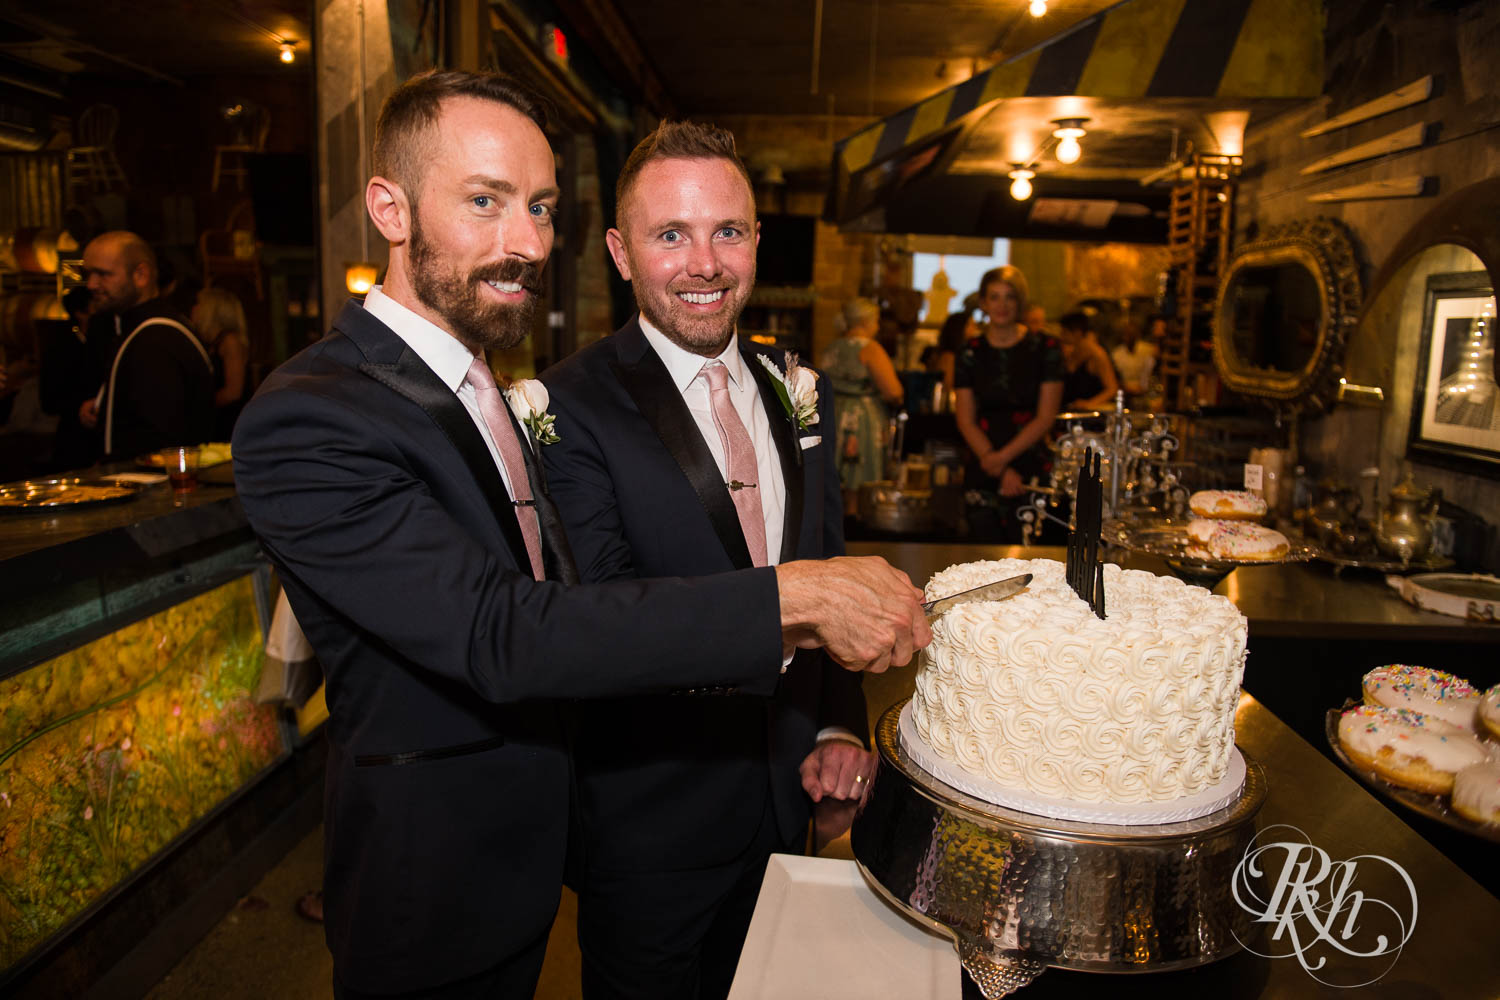 Grooms cut cake during wedding reception speeches at Warehouse Winery wedding in Saint Louis Park, Minnesota.